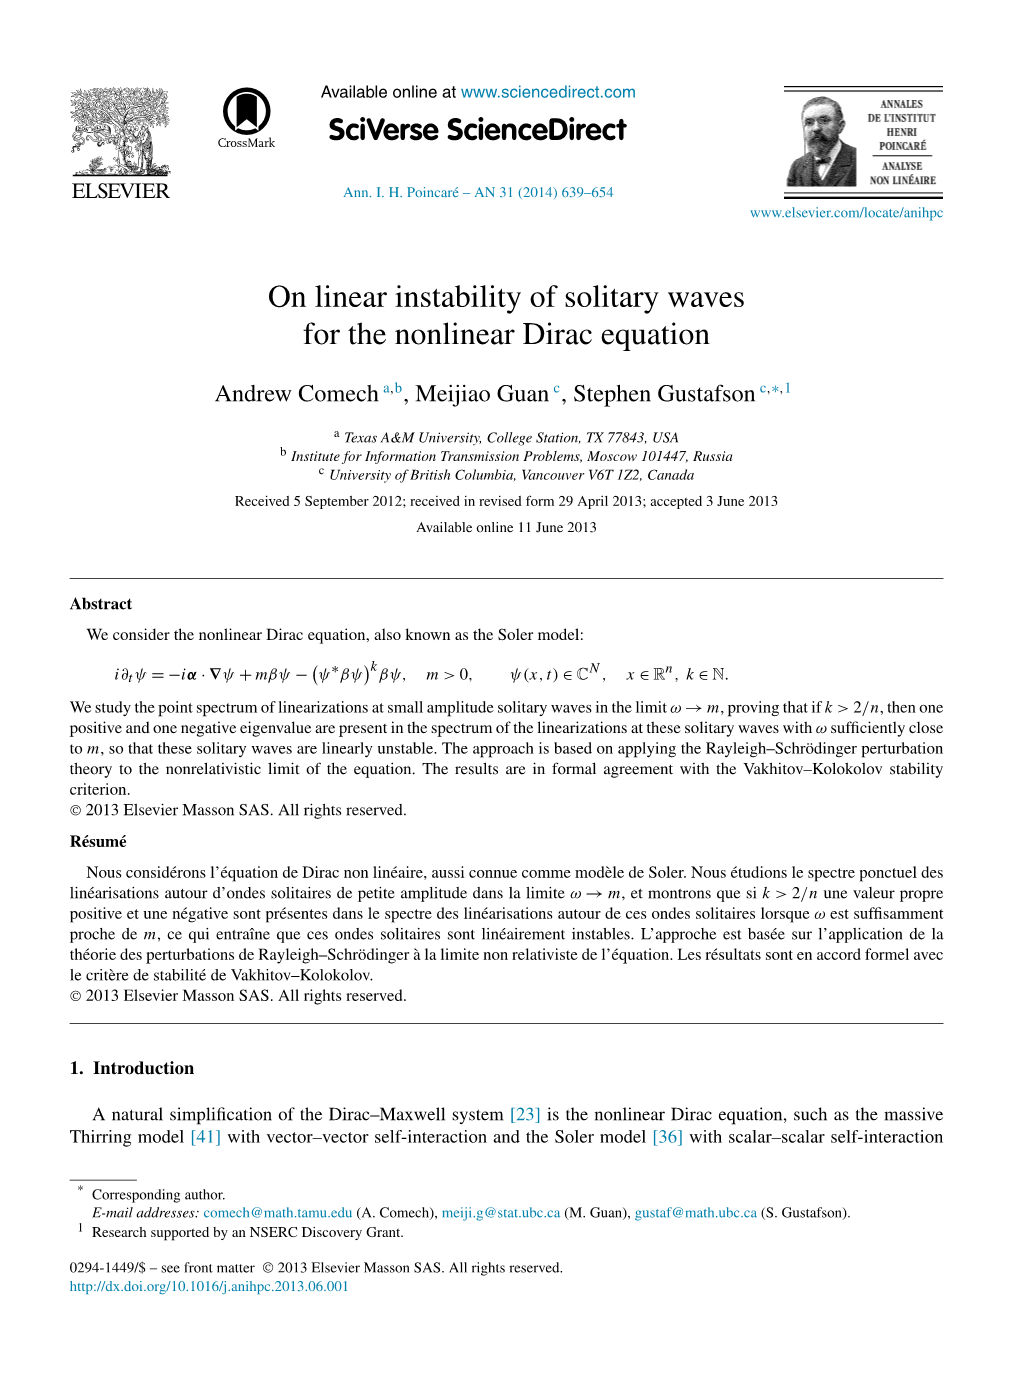 On Linear Instability of Solitary Waves for the Nonlinear Dirac Equation